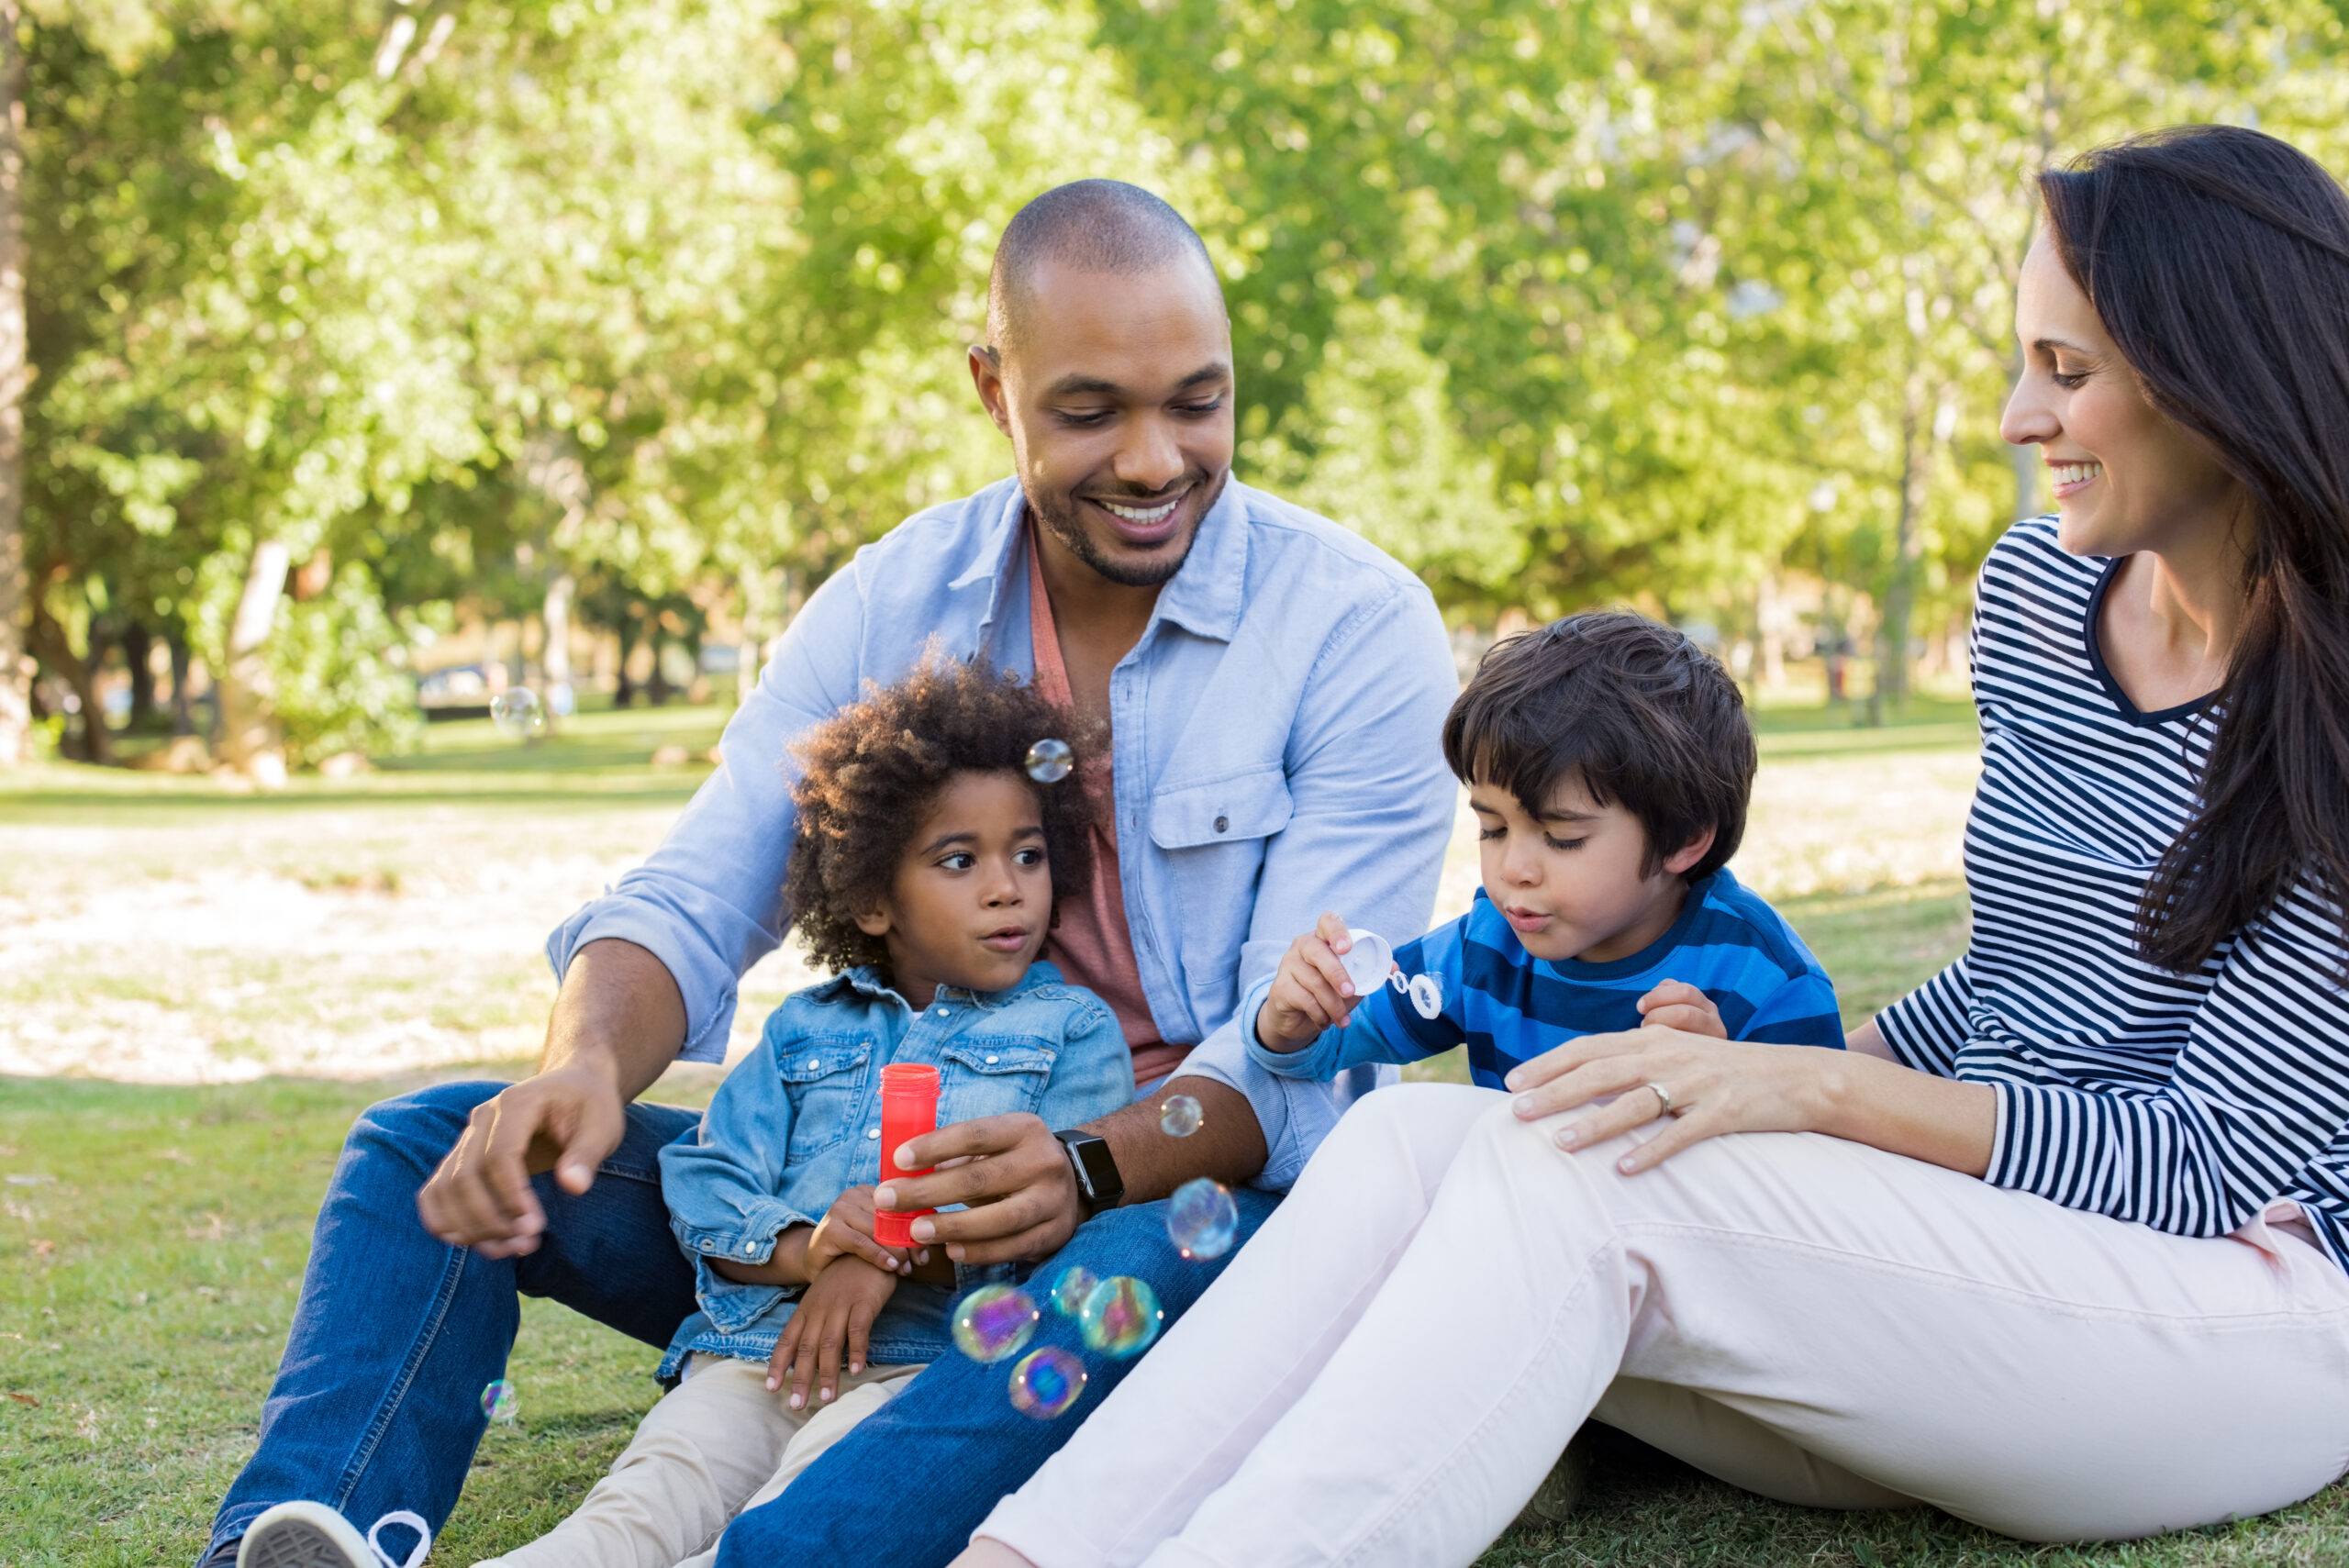 A group of four people are sitting on grass in a park on a sunny day. A man and woman are watching two children blowing bubbles. The man is holding a young child on his lap, while the older child is focused on blowing bubbles from a wand. Trees are in the background.